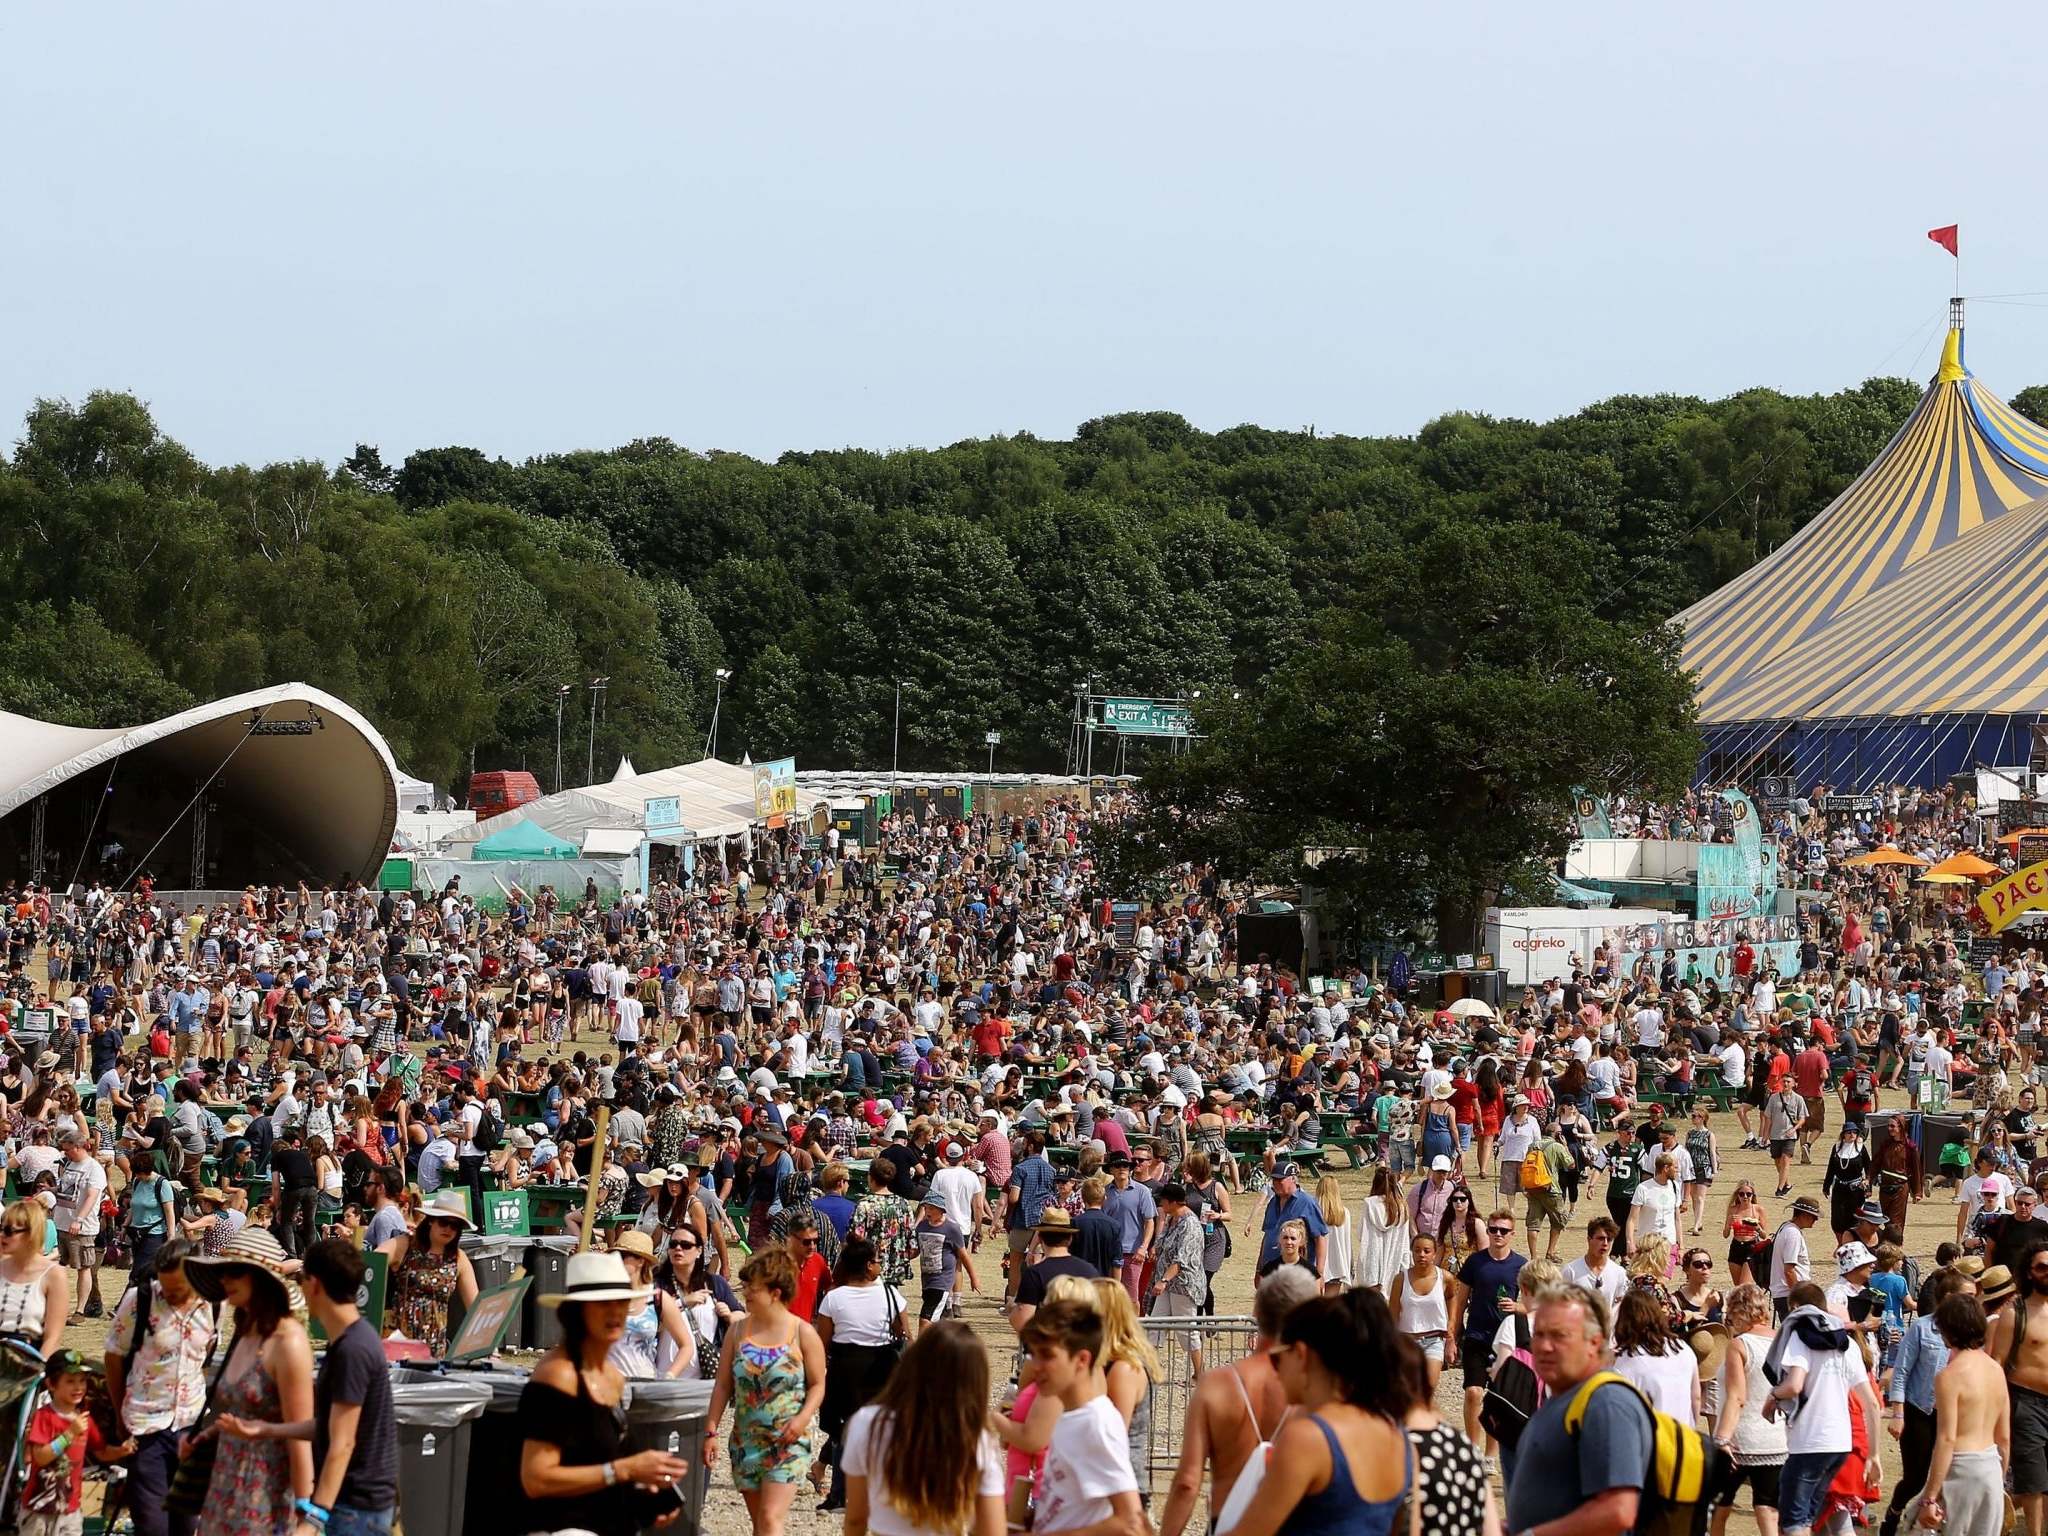 The alleged incident occurred in a camping area at the music festival on Saturday night between 10pm and 11pm